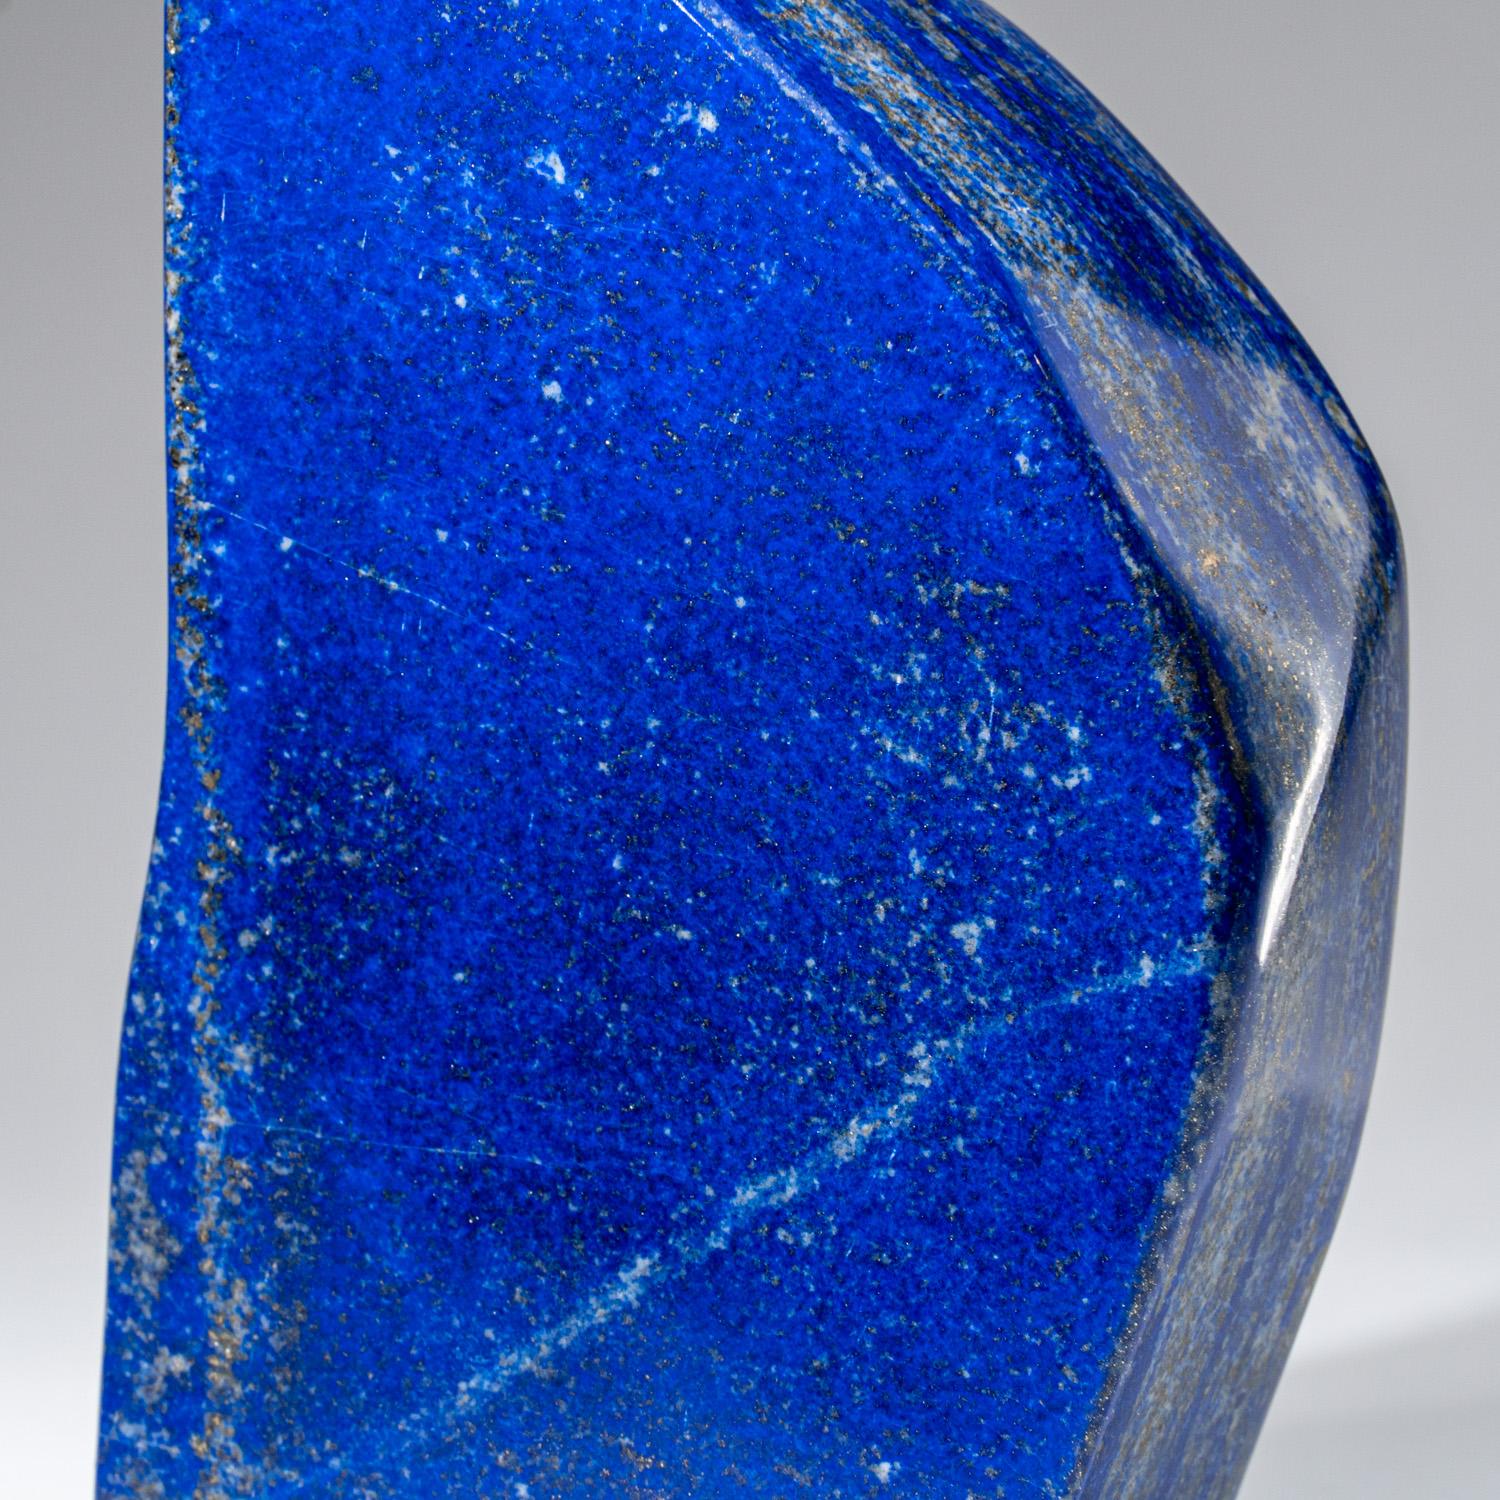 Contemporary Genuine Polished Lapis Lazuli Freeform from Afghanistan '4 lbs' For Sale